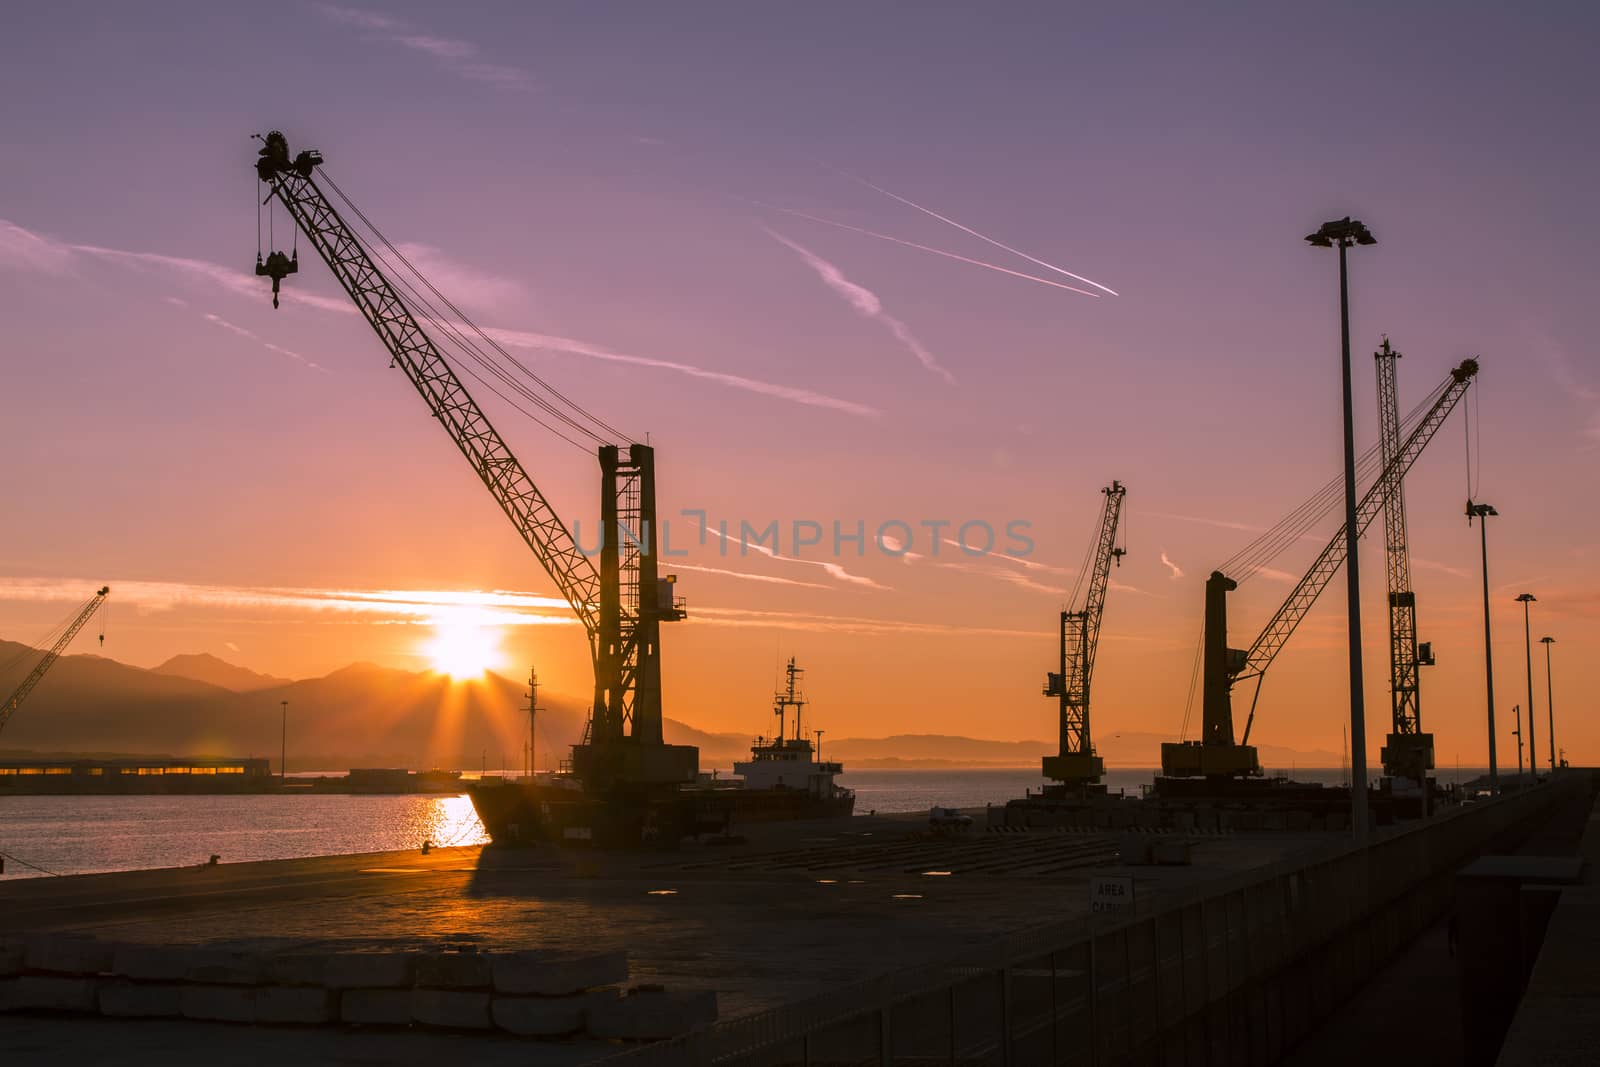 View of a cranes at the port to' dawn